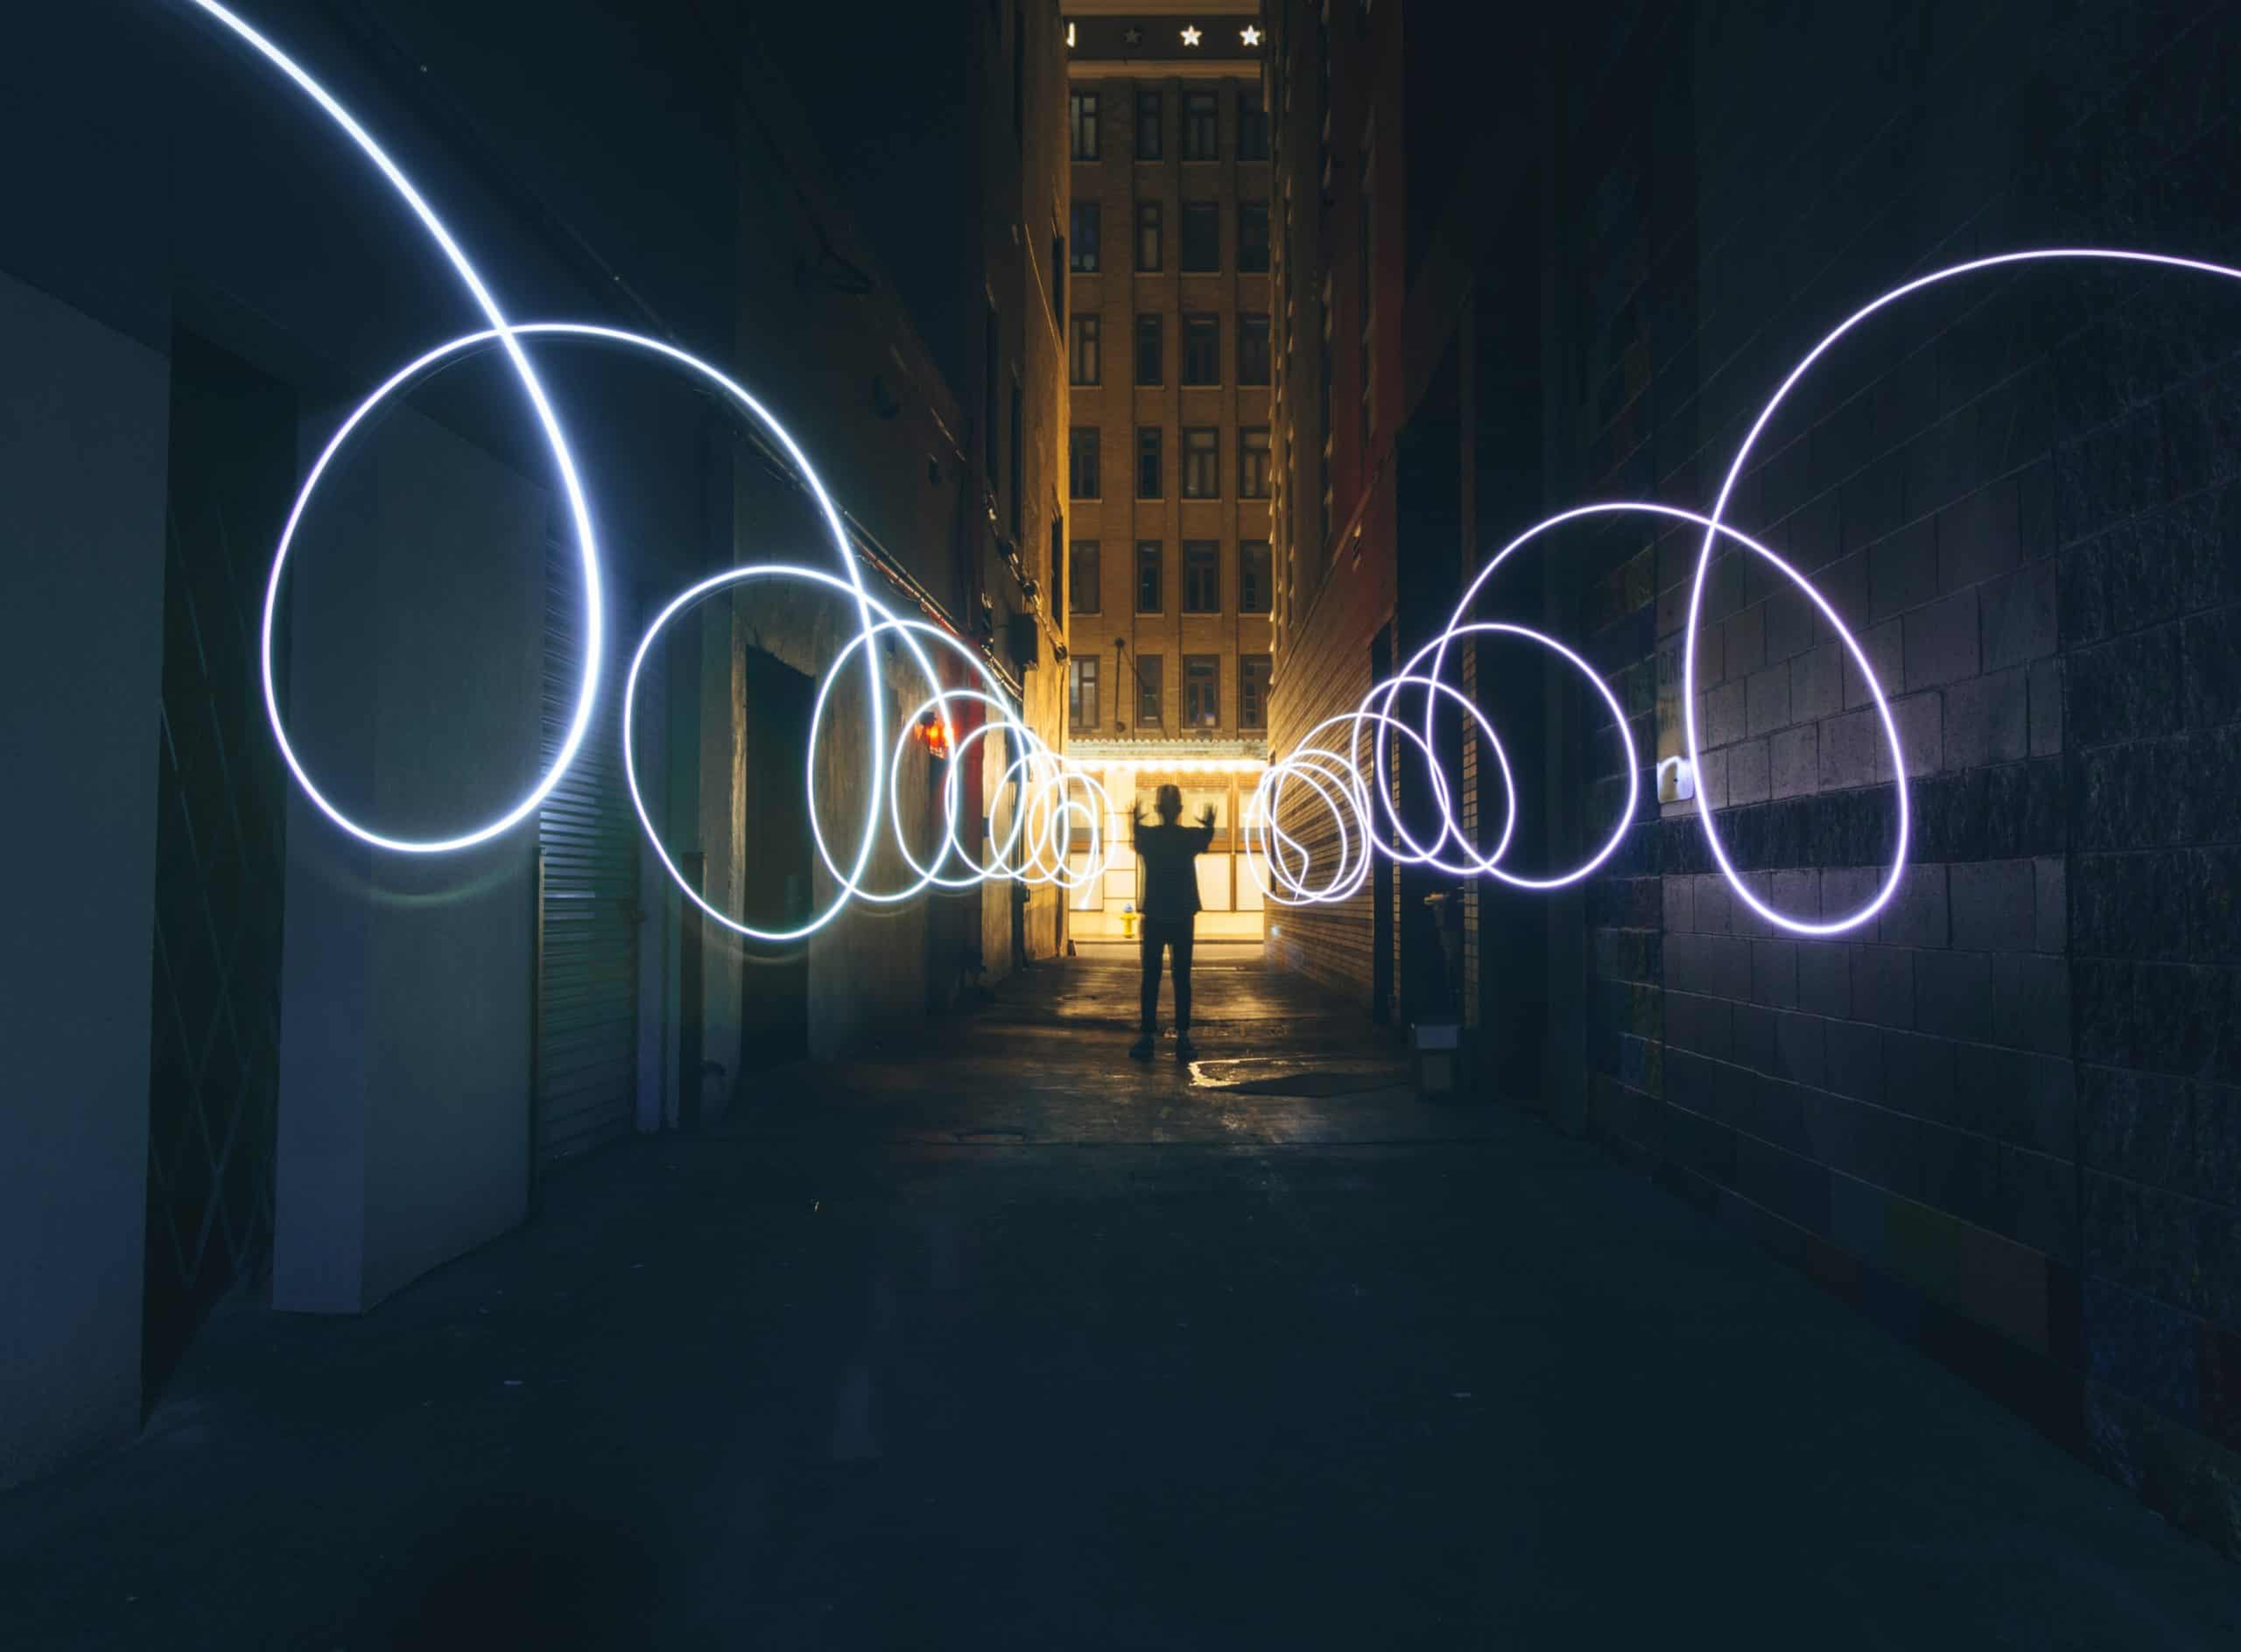 long exposure photograph of a man in a dark alley creating swirls of light, inventing something